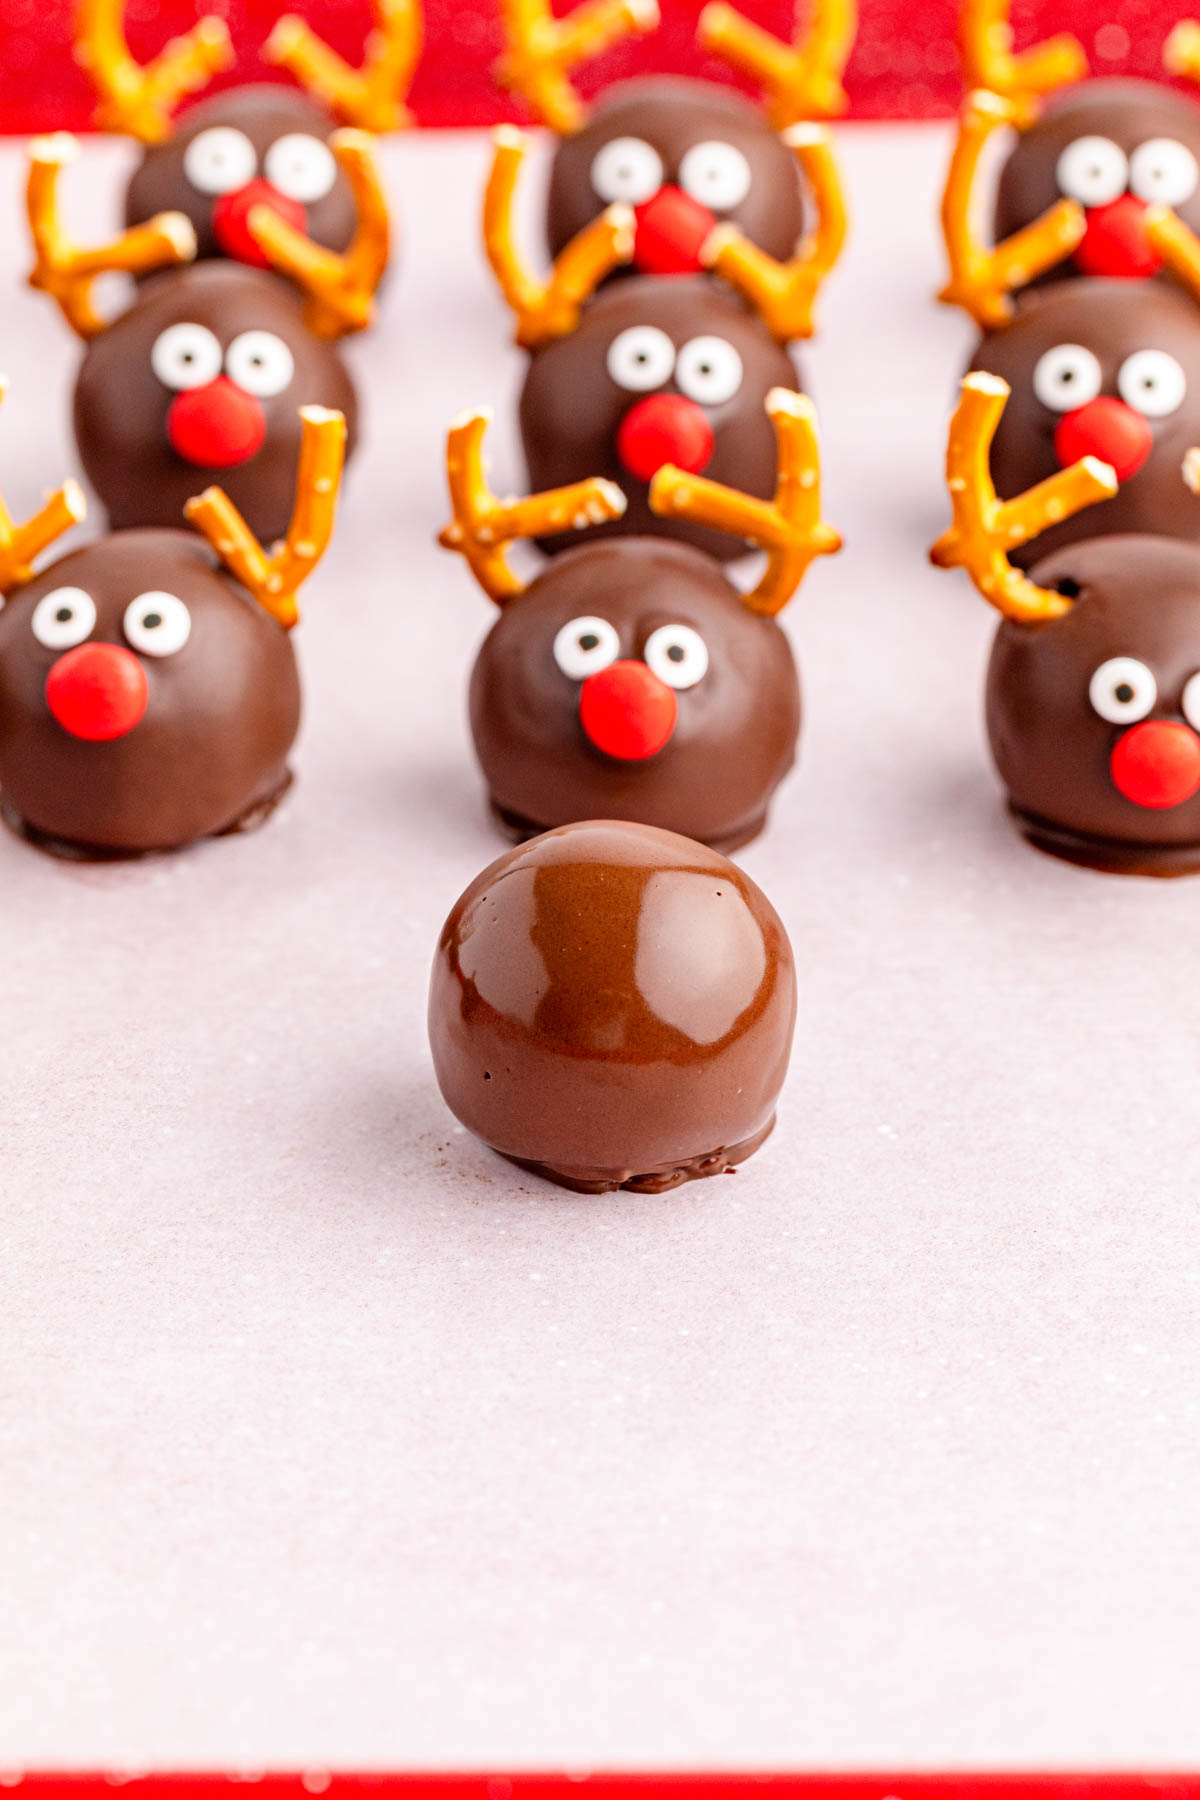 Chocolate reindeer truffles on a red background.